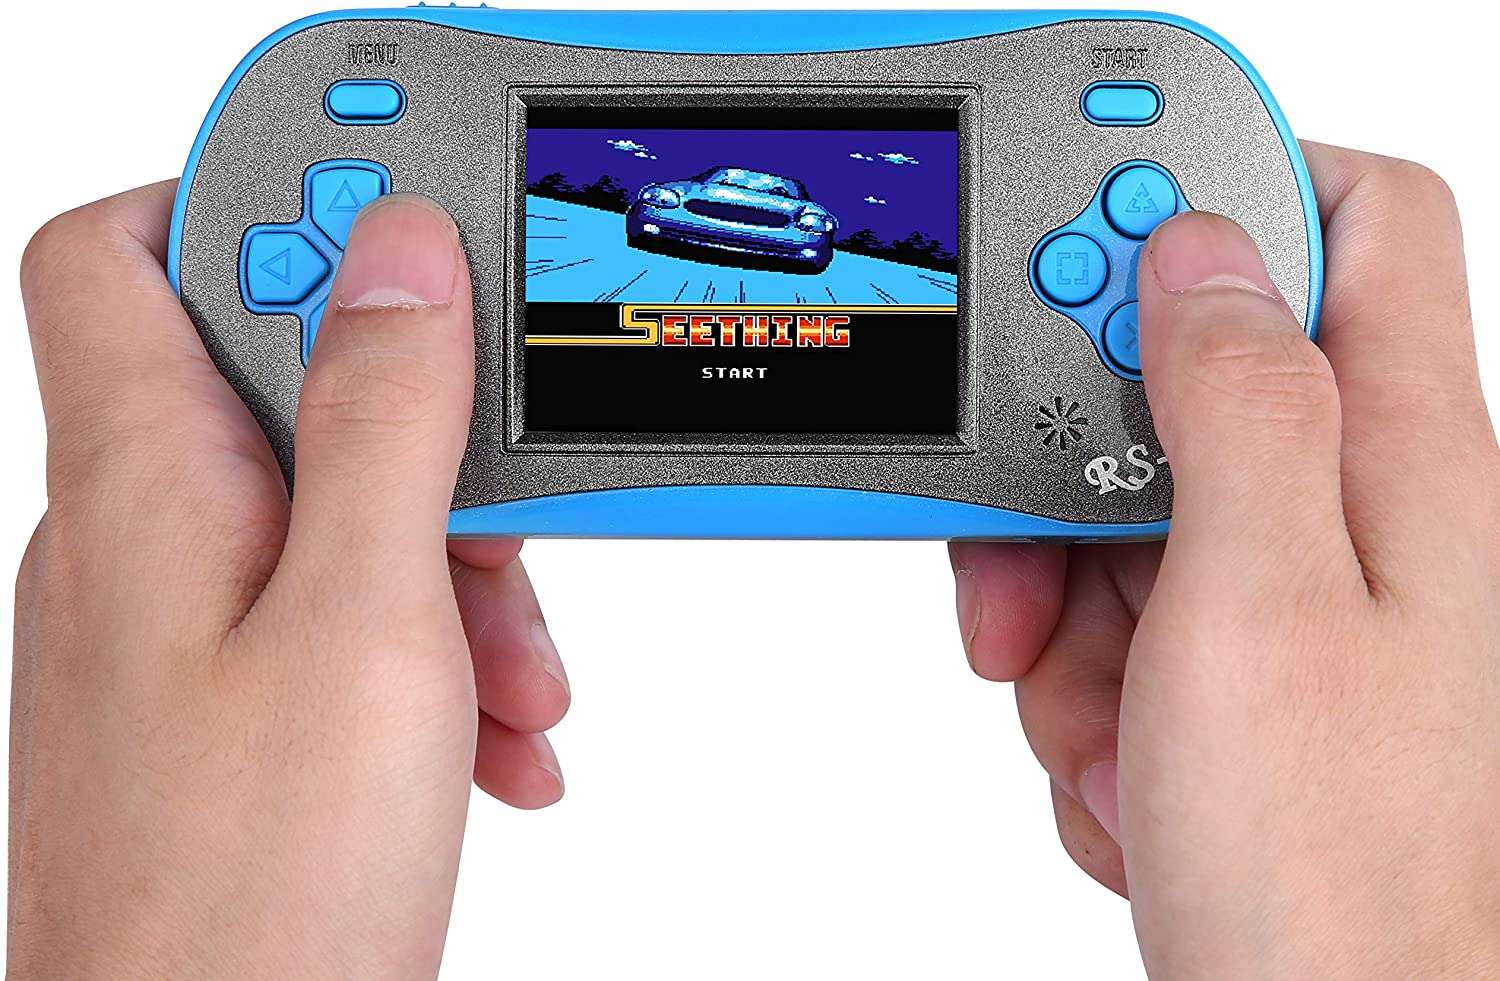 FAMILY POCKET RS16 Portable Classic Game Controller(BLUE) Built-in 260 Game